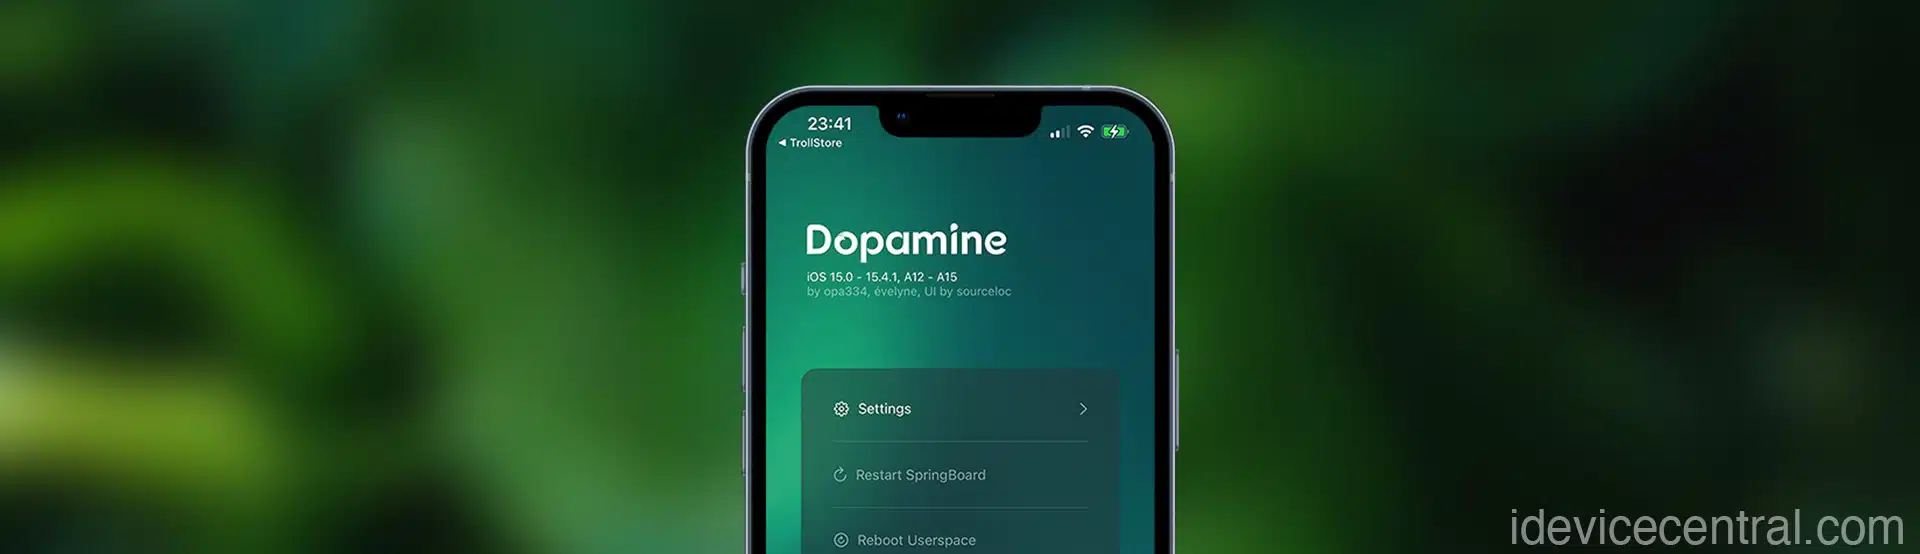 Dopamine Jailbreak (Fugu15 Max) Release Is Coming Soon for iOS 15.0 - 15.4.1 A12+